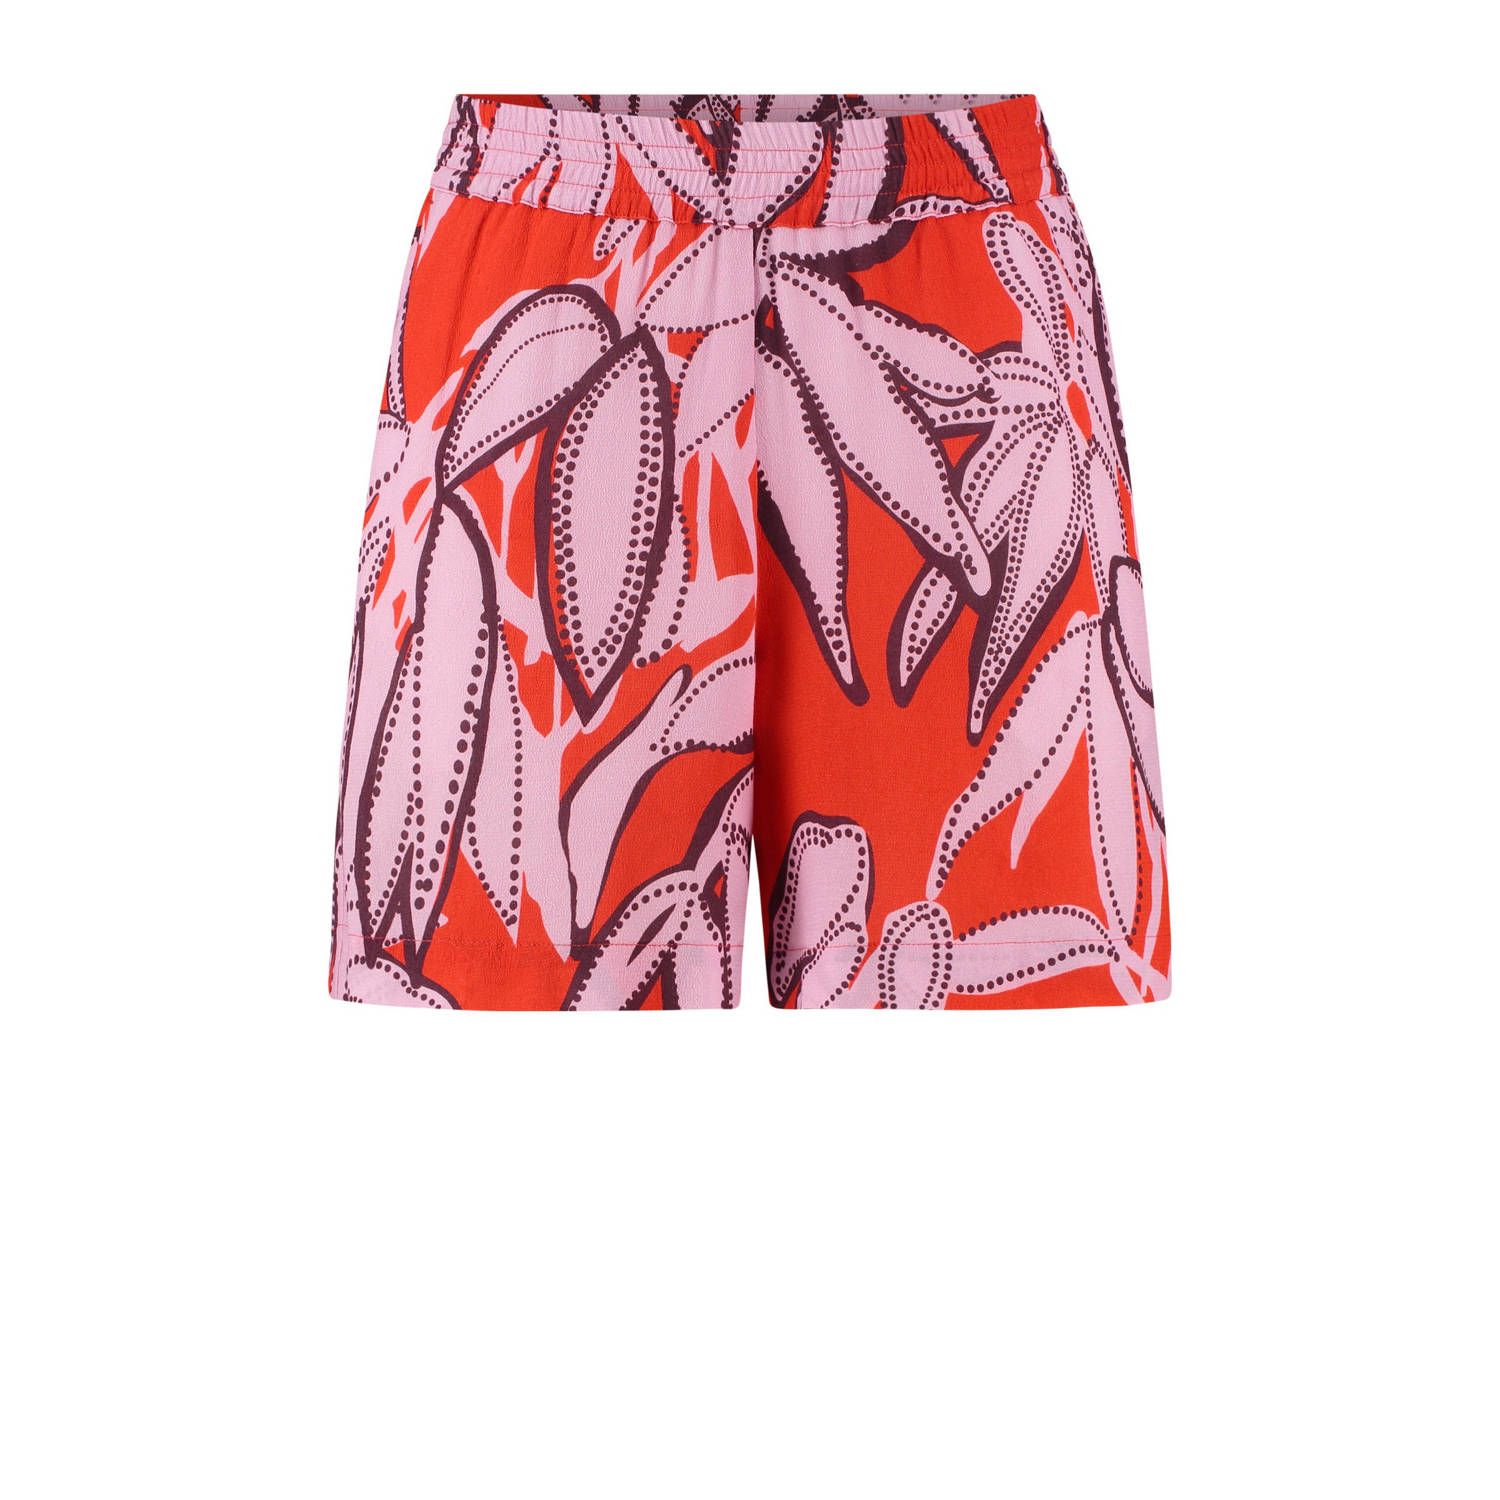 Expresso relaxed short met bladprint rood roze